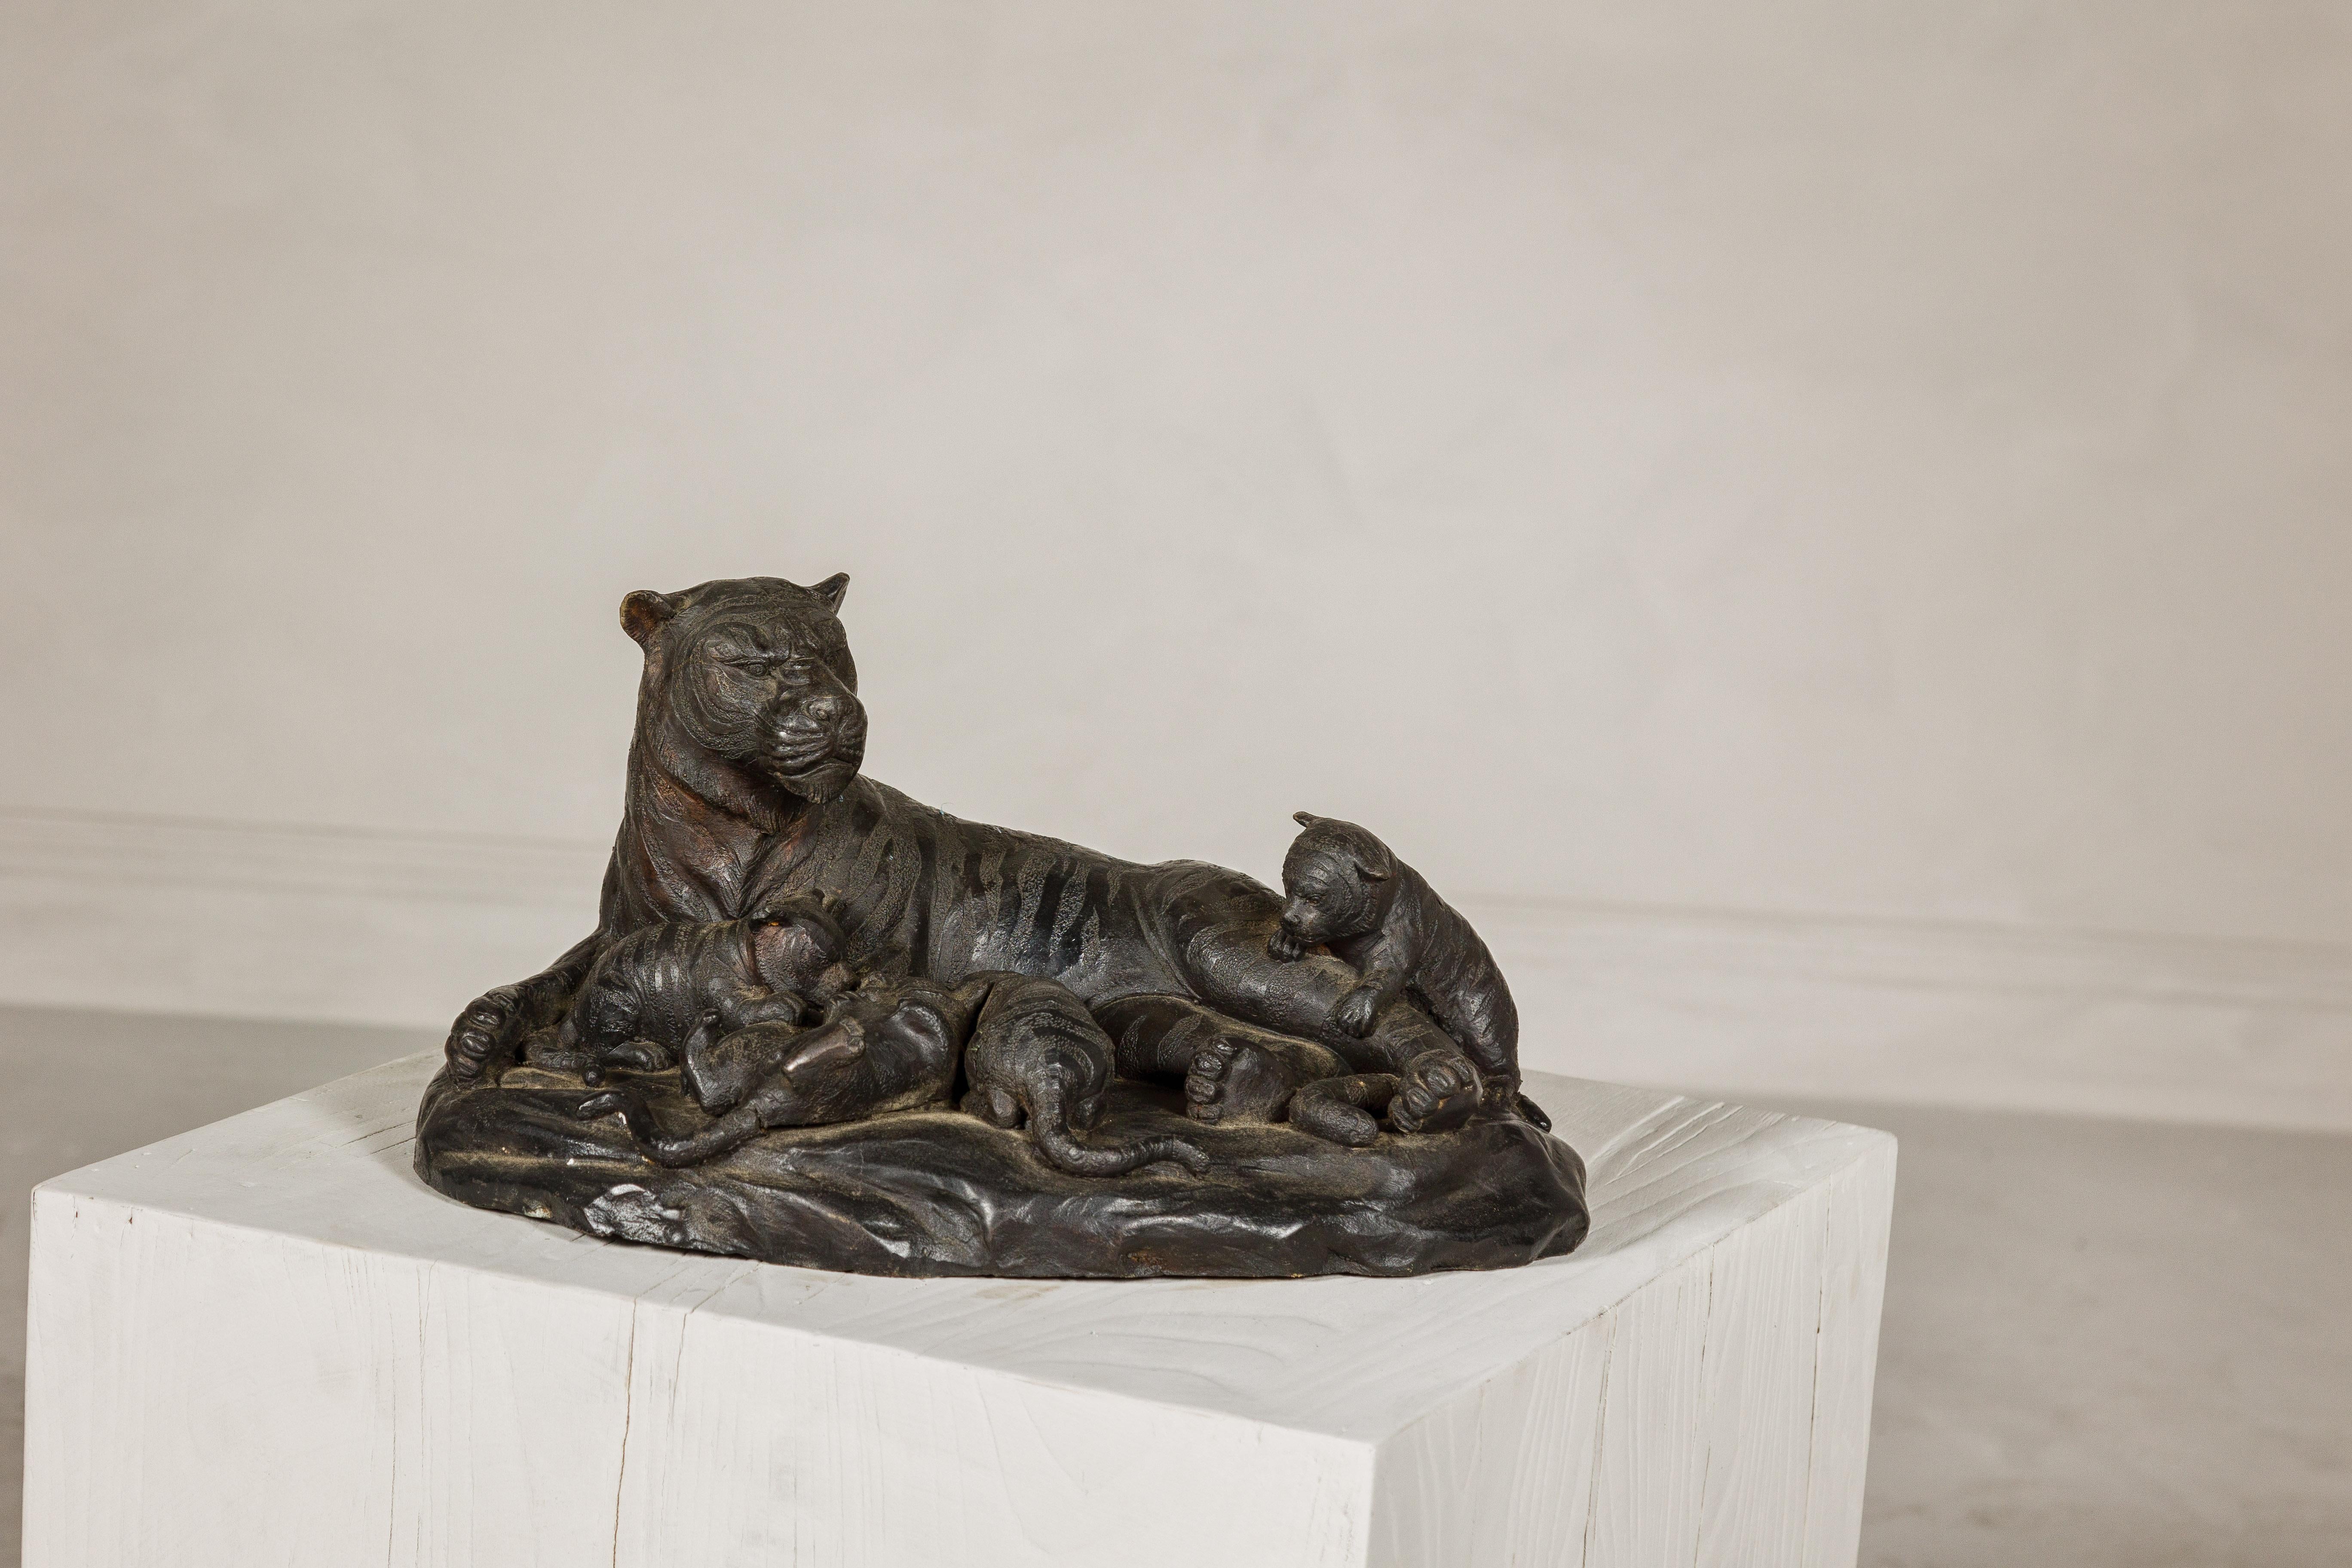 This vintage family of tigers bronze tabletop statuette captures a tender yet powerful moment in the wild, portraying a mama tiger reclining while her cubs playfully crawl over her. The scene is brought to life through the lost wax process, a method